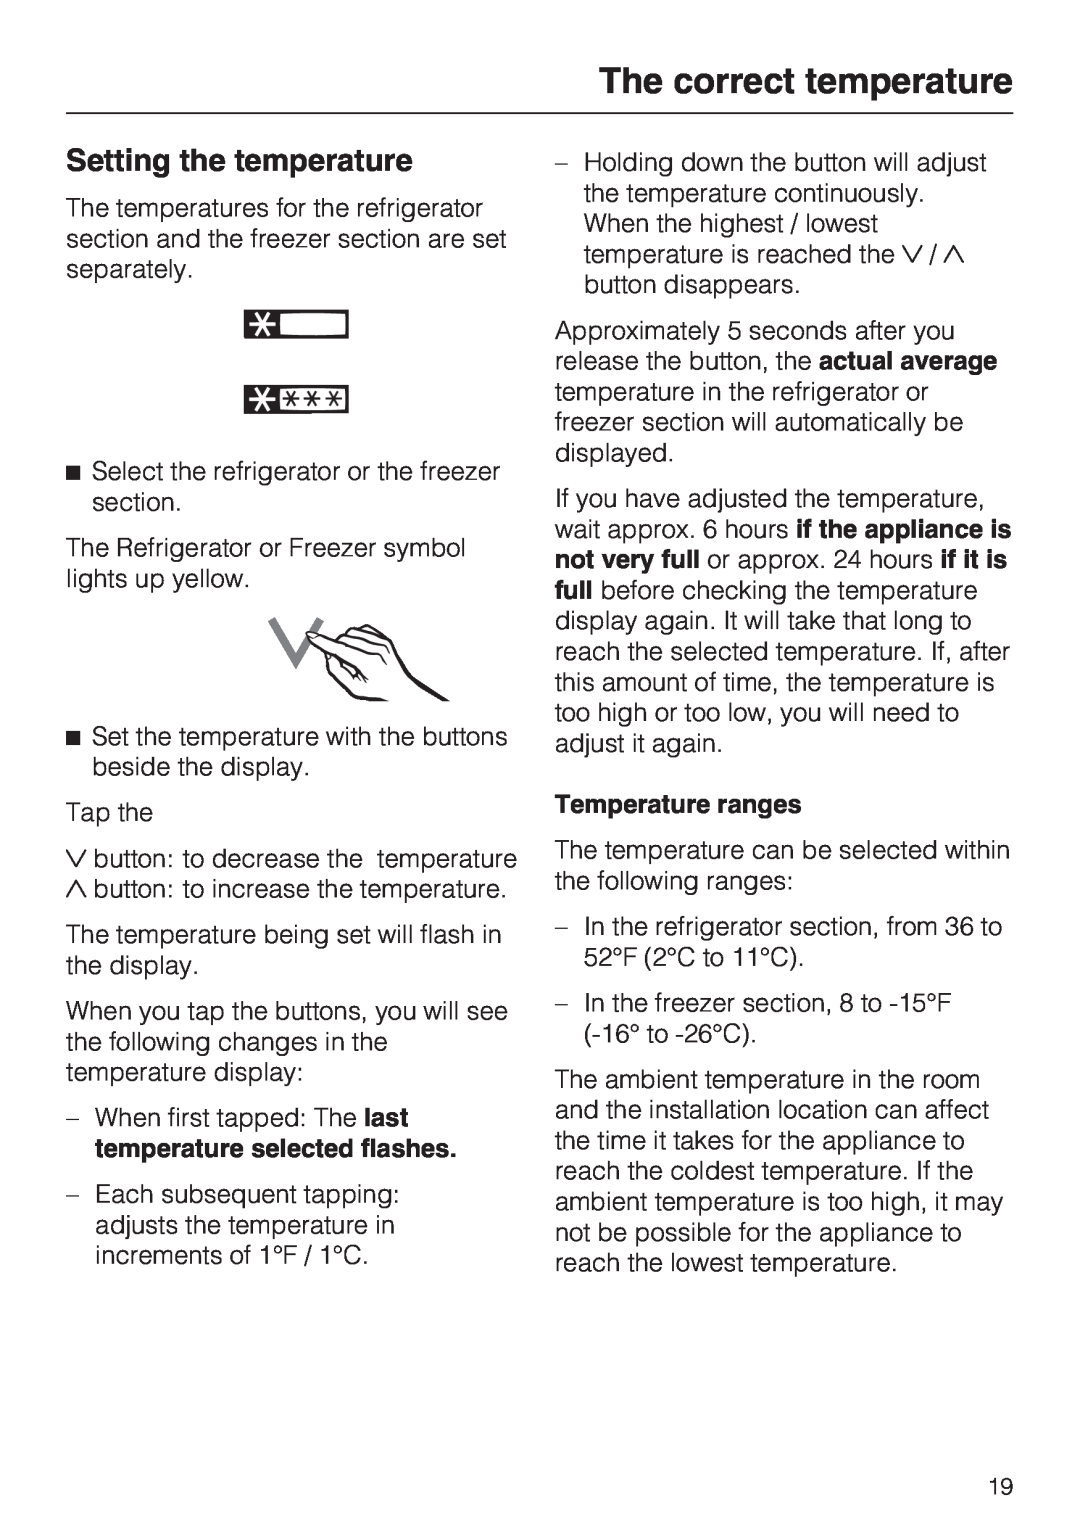 Miele KFN 14943 SD ED installation instructions Setting the temperature, Temperature ranges, The correct temperature 